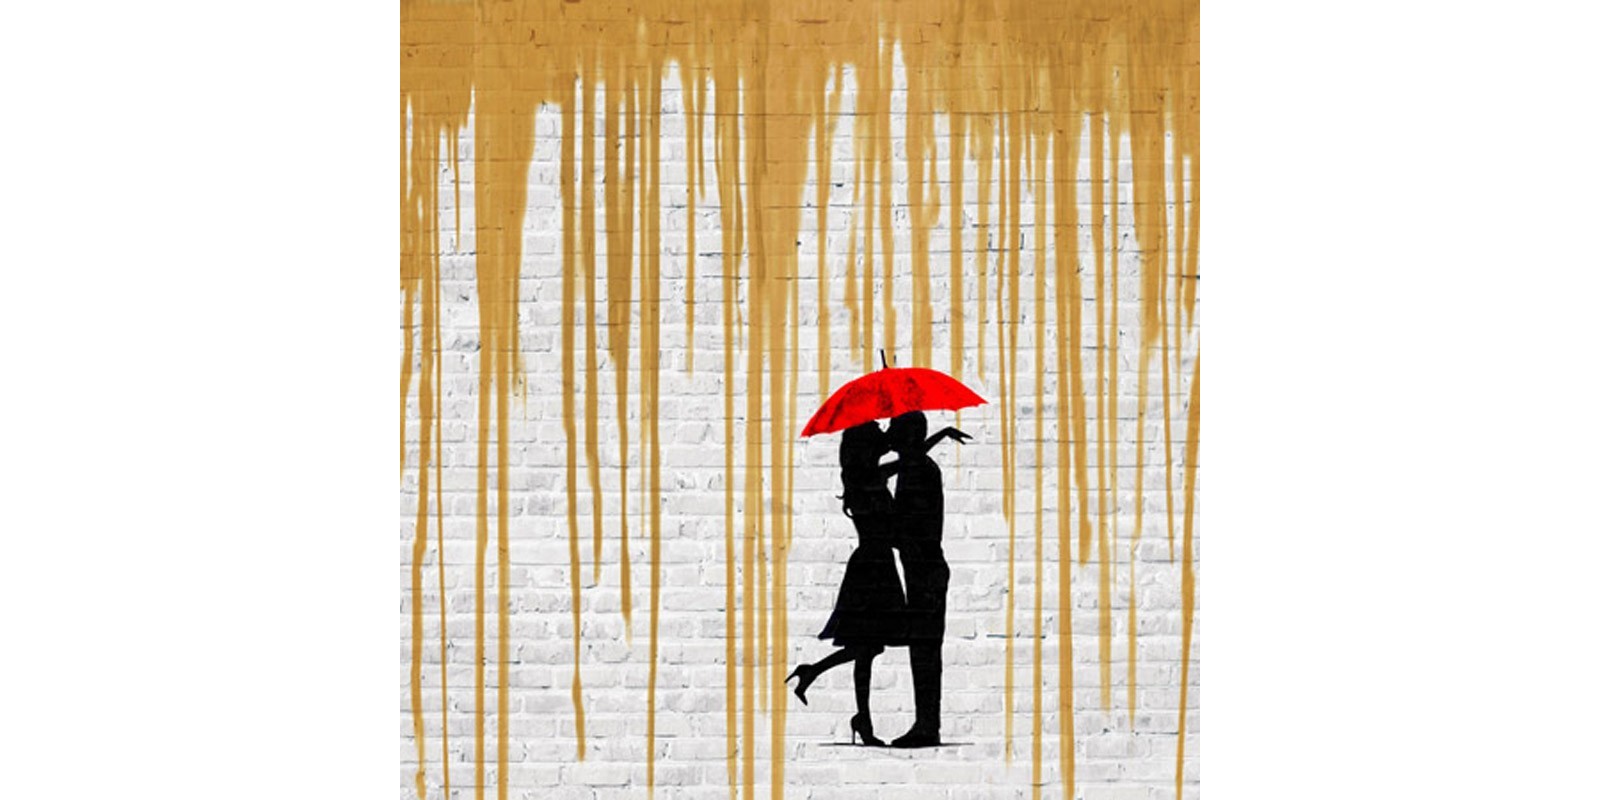 Masterfunk Collective - Romance in the Rain (Gold, detail)